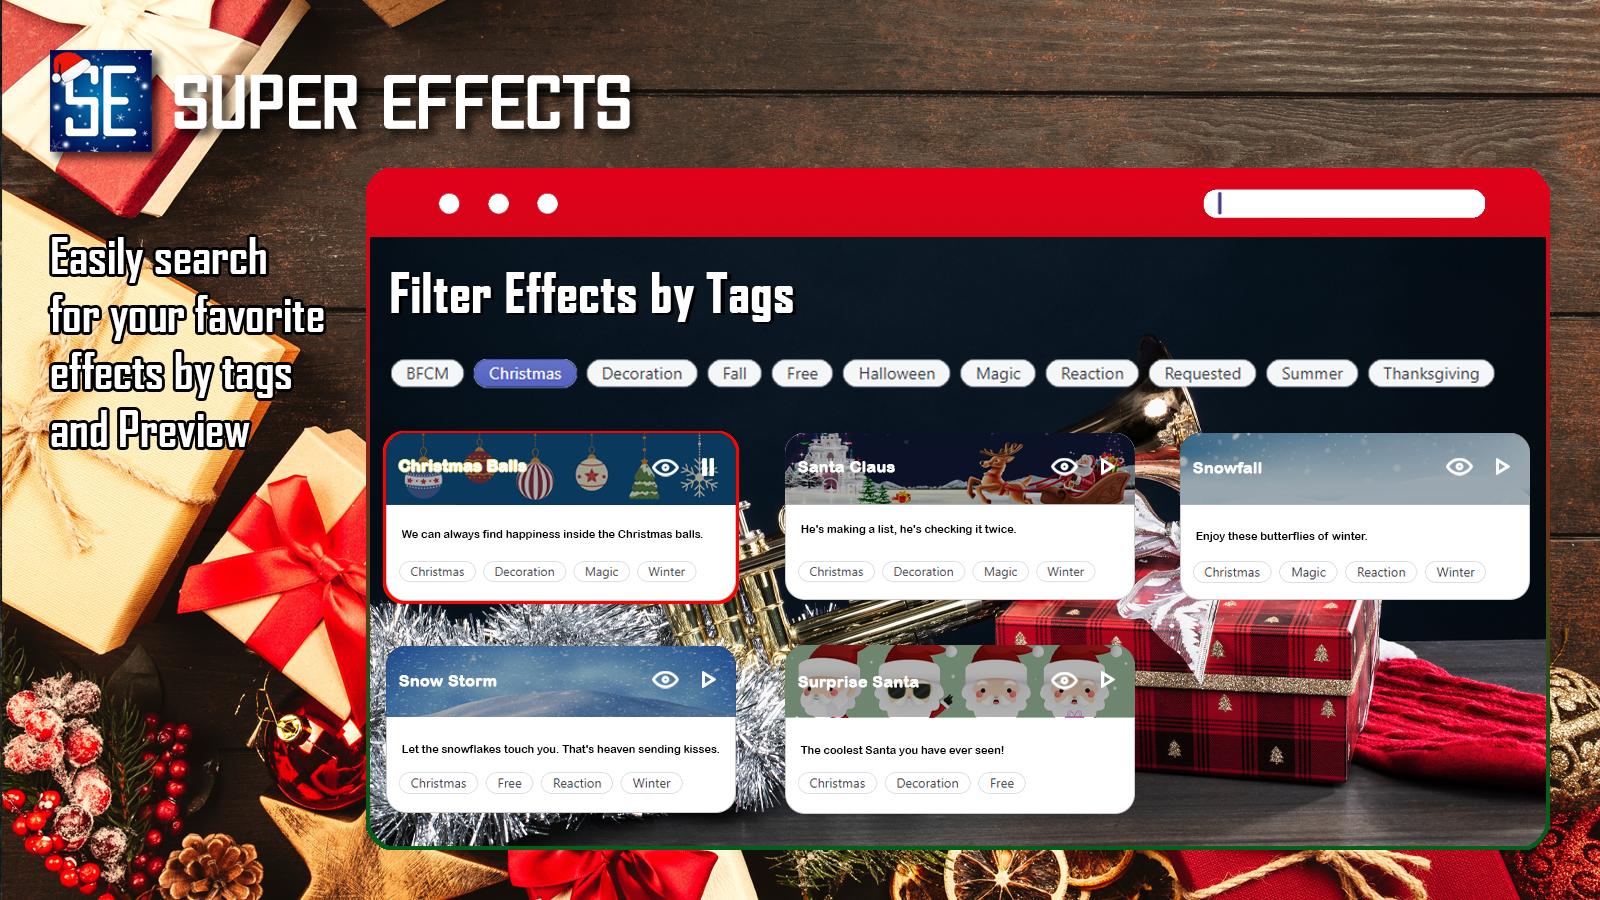 Super Effects filter effects by tags